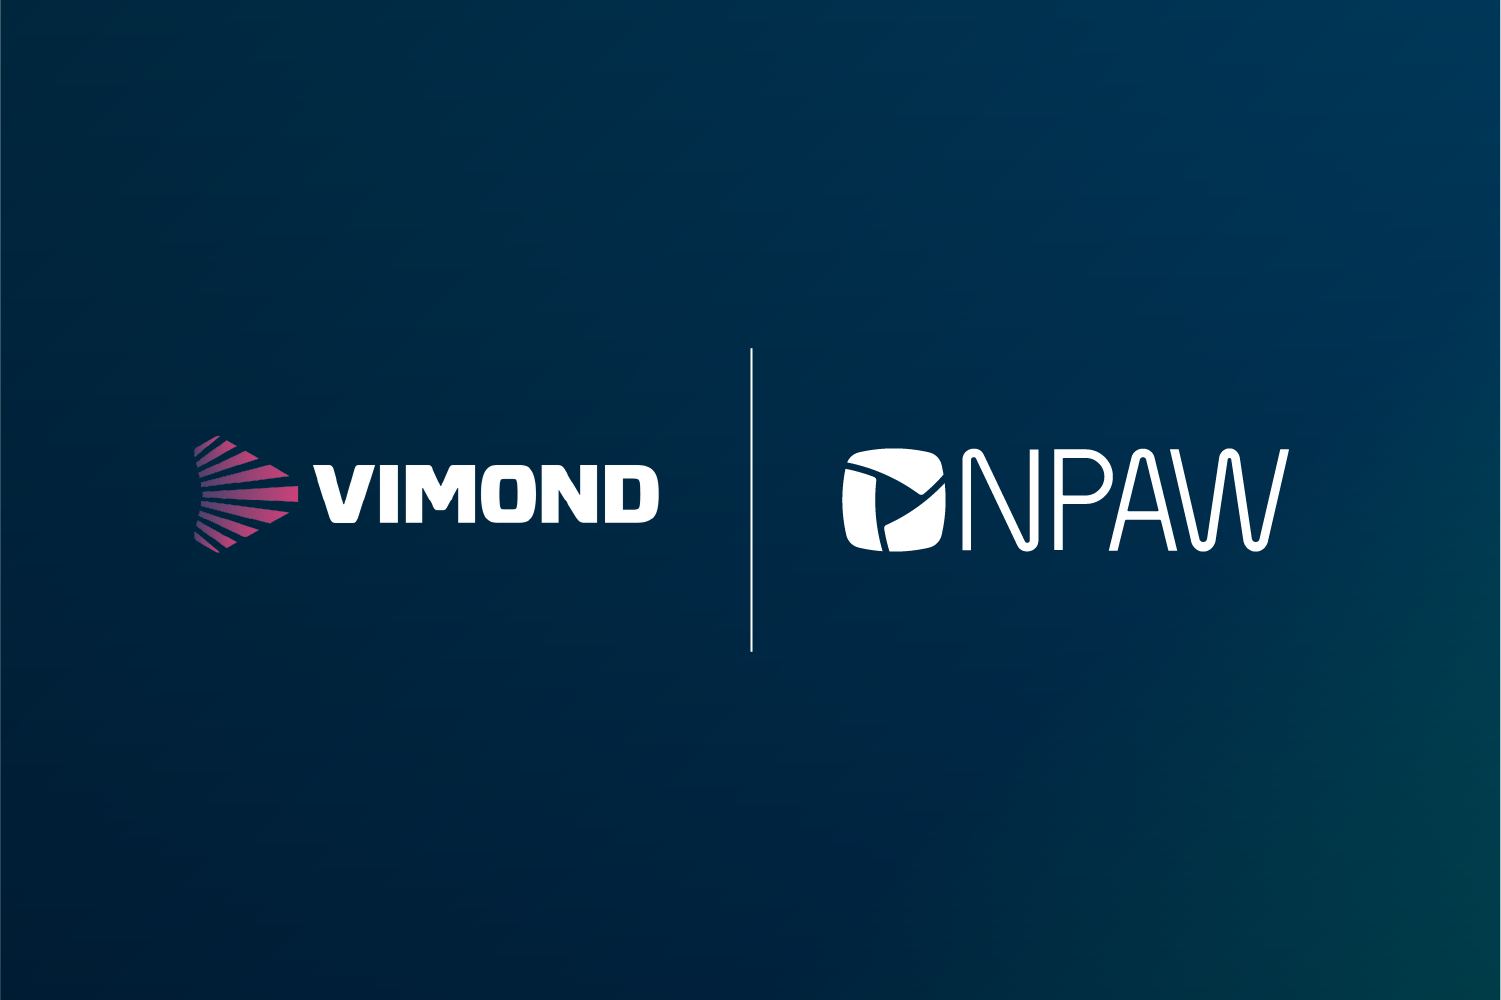 Vimond and NPAW Team Up To Boost Streaming for Broadcasters